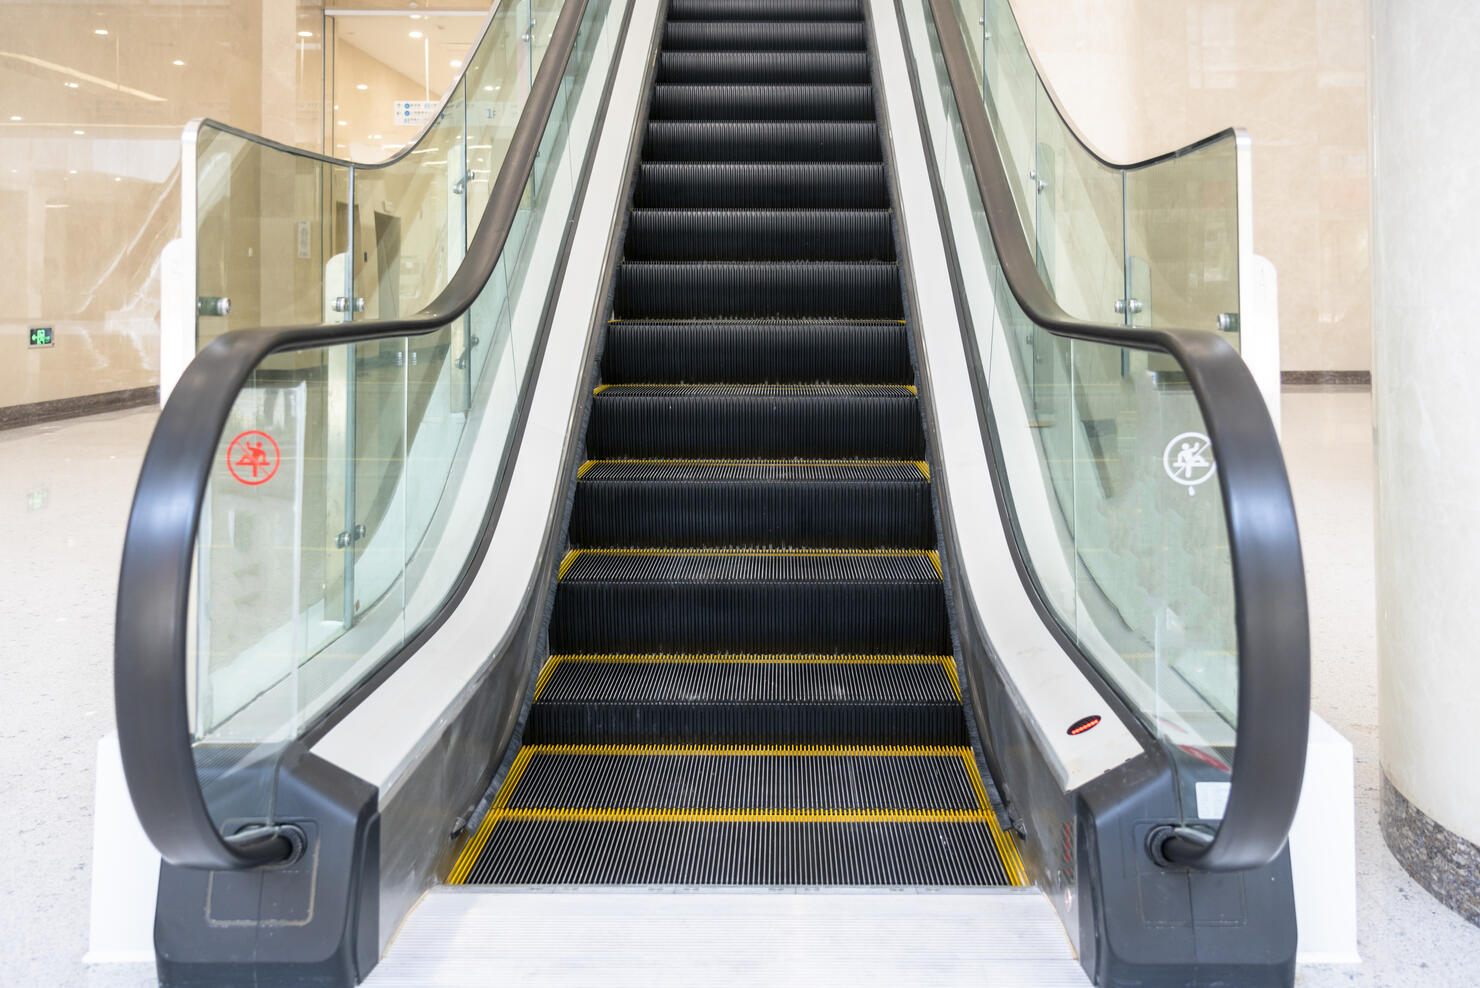 Front view of escalator